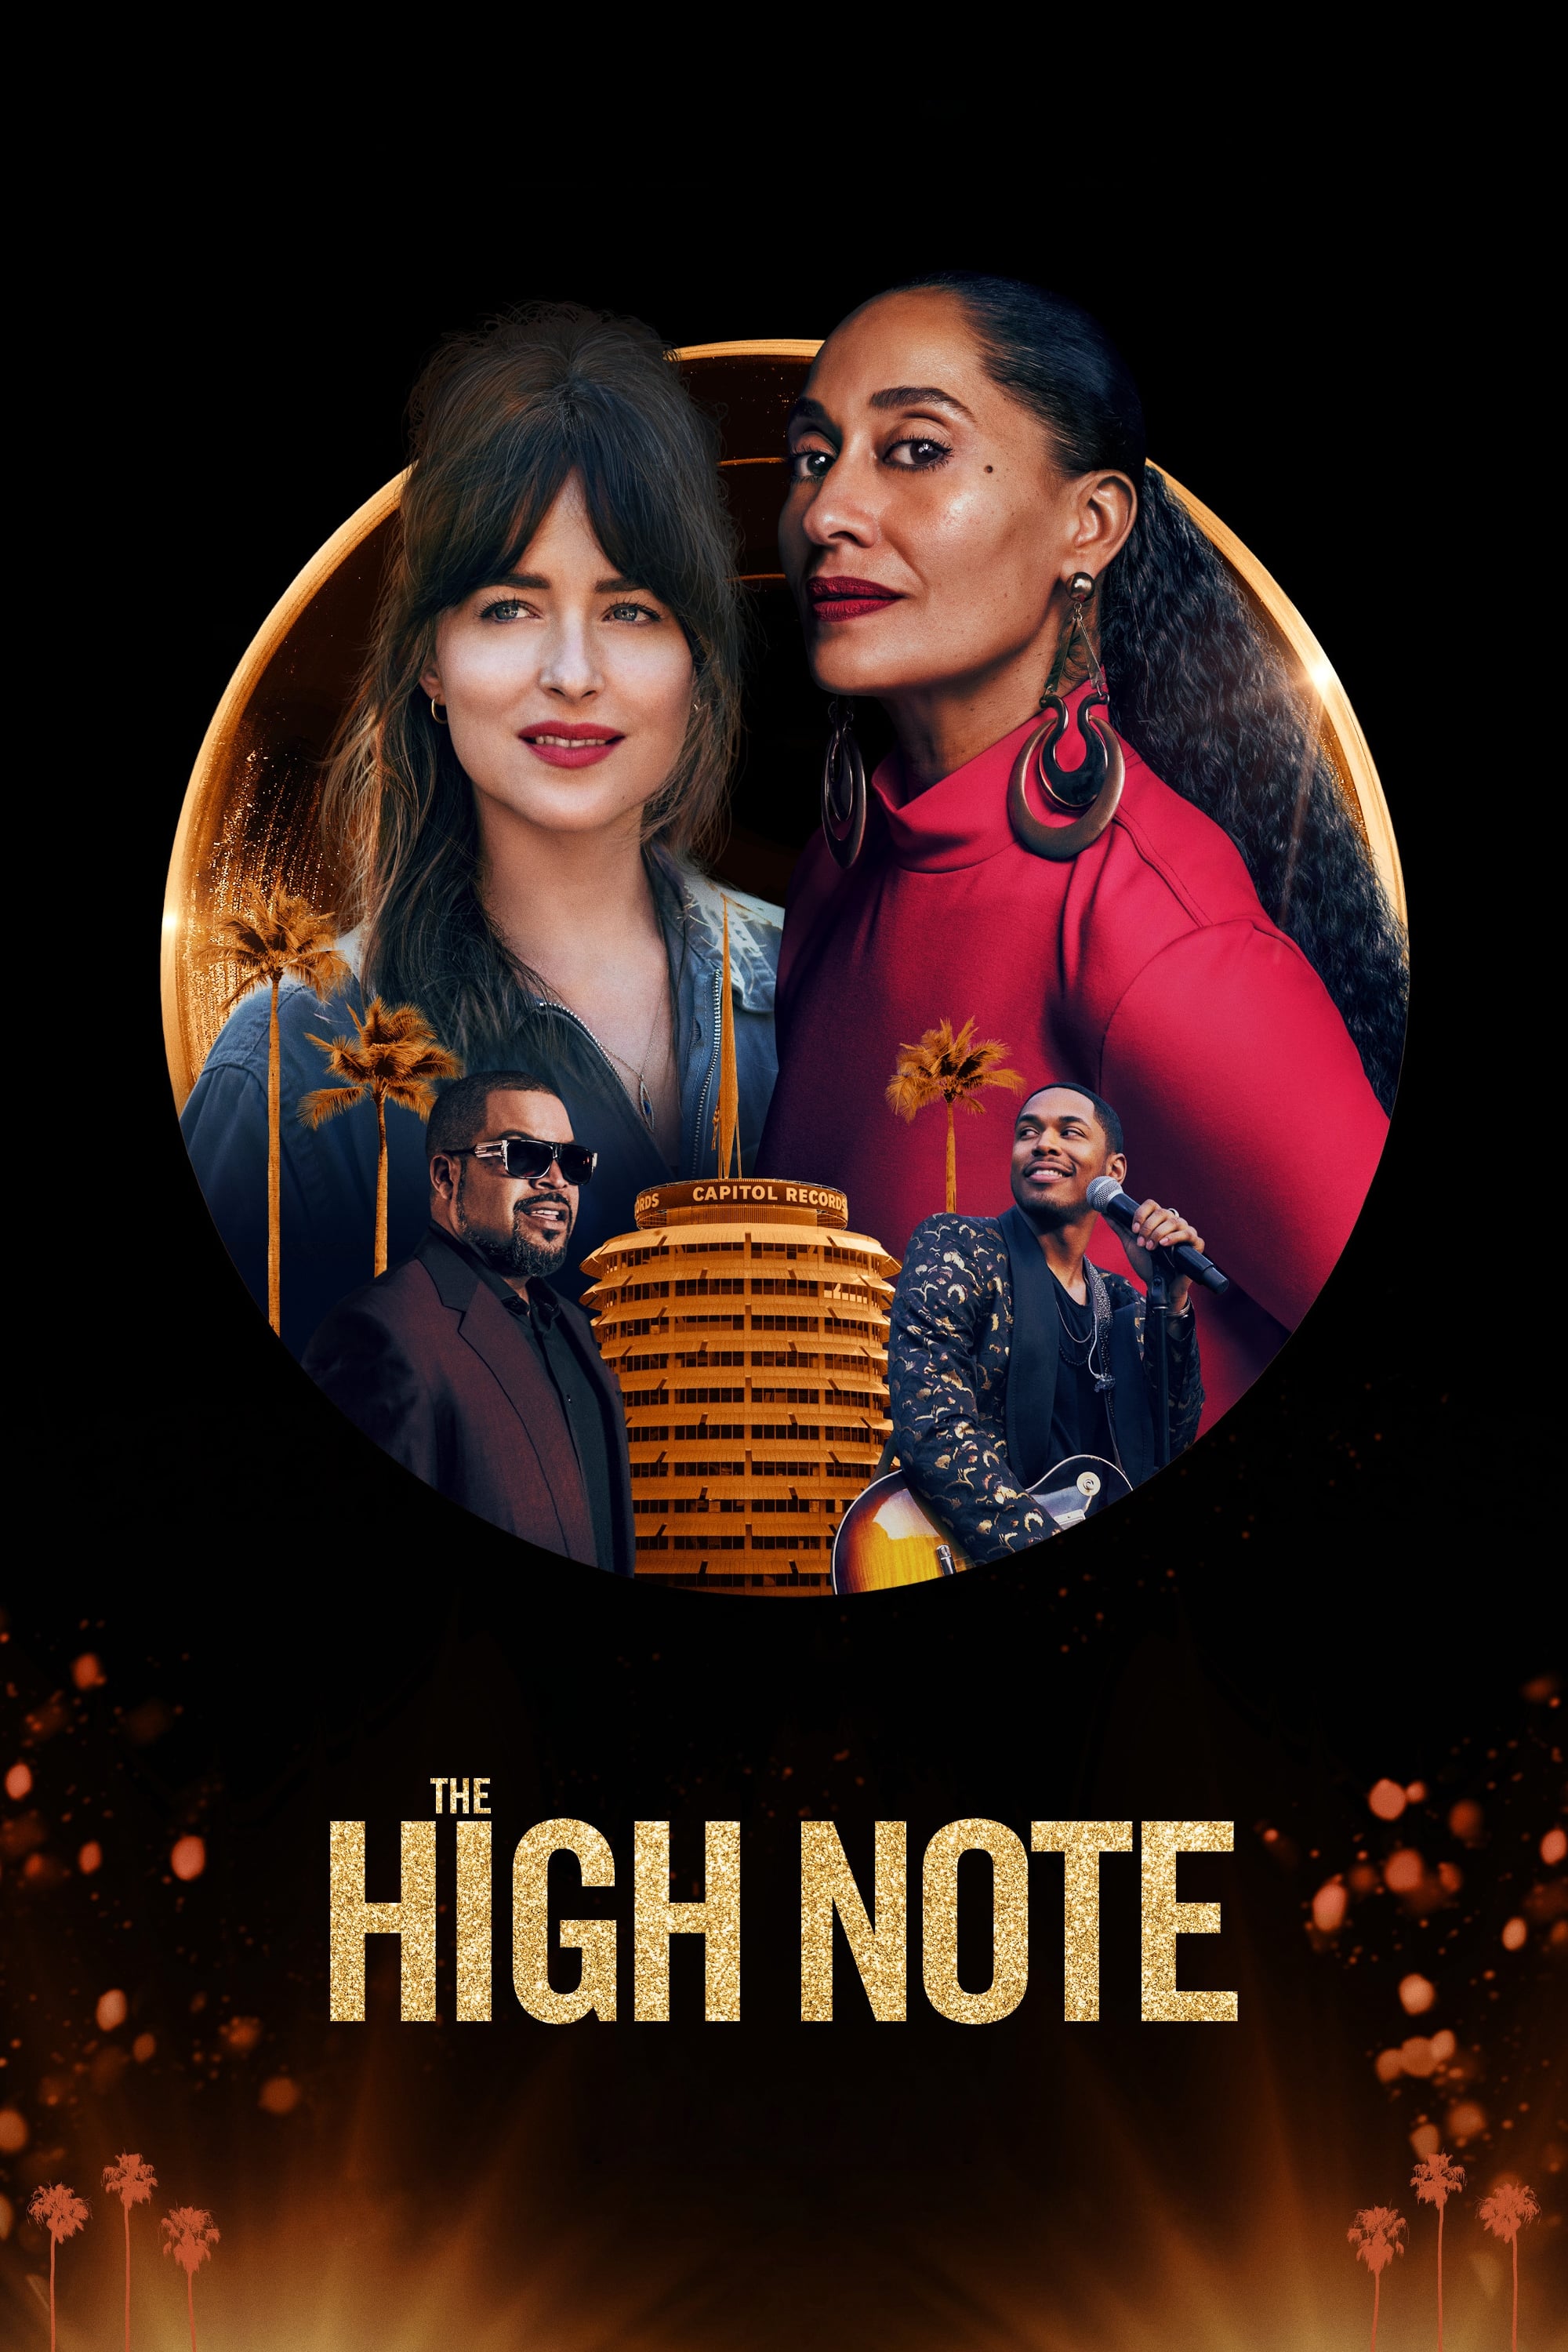 Nốt Cao (The High Note) [2020]